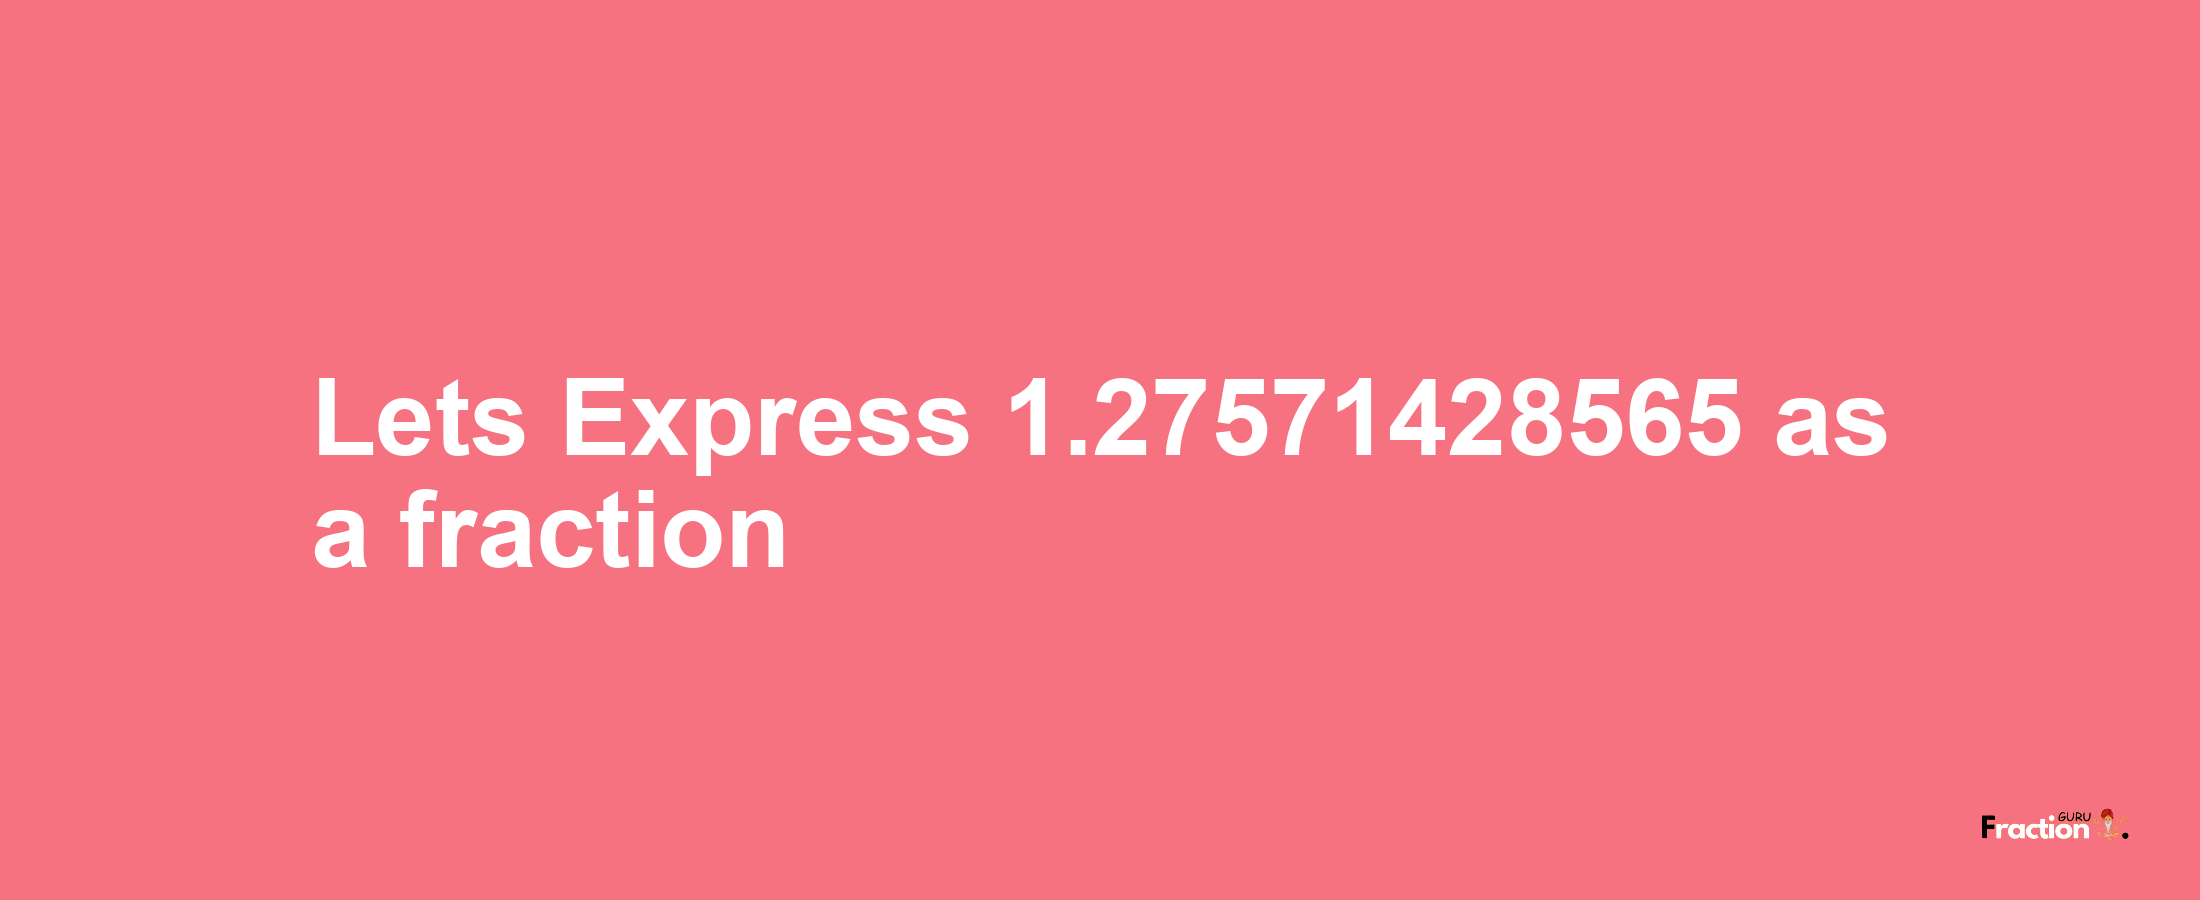 Lets Express 1.27571428565 as afraction